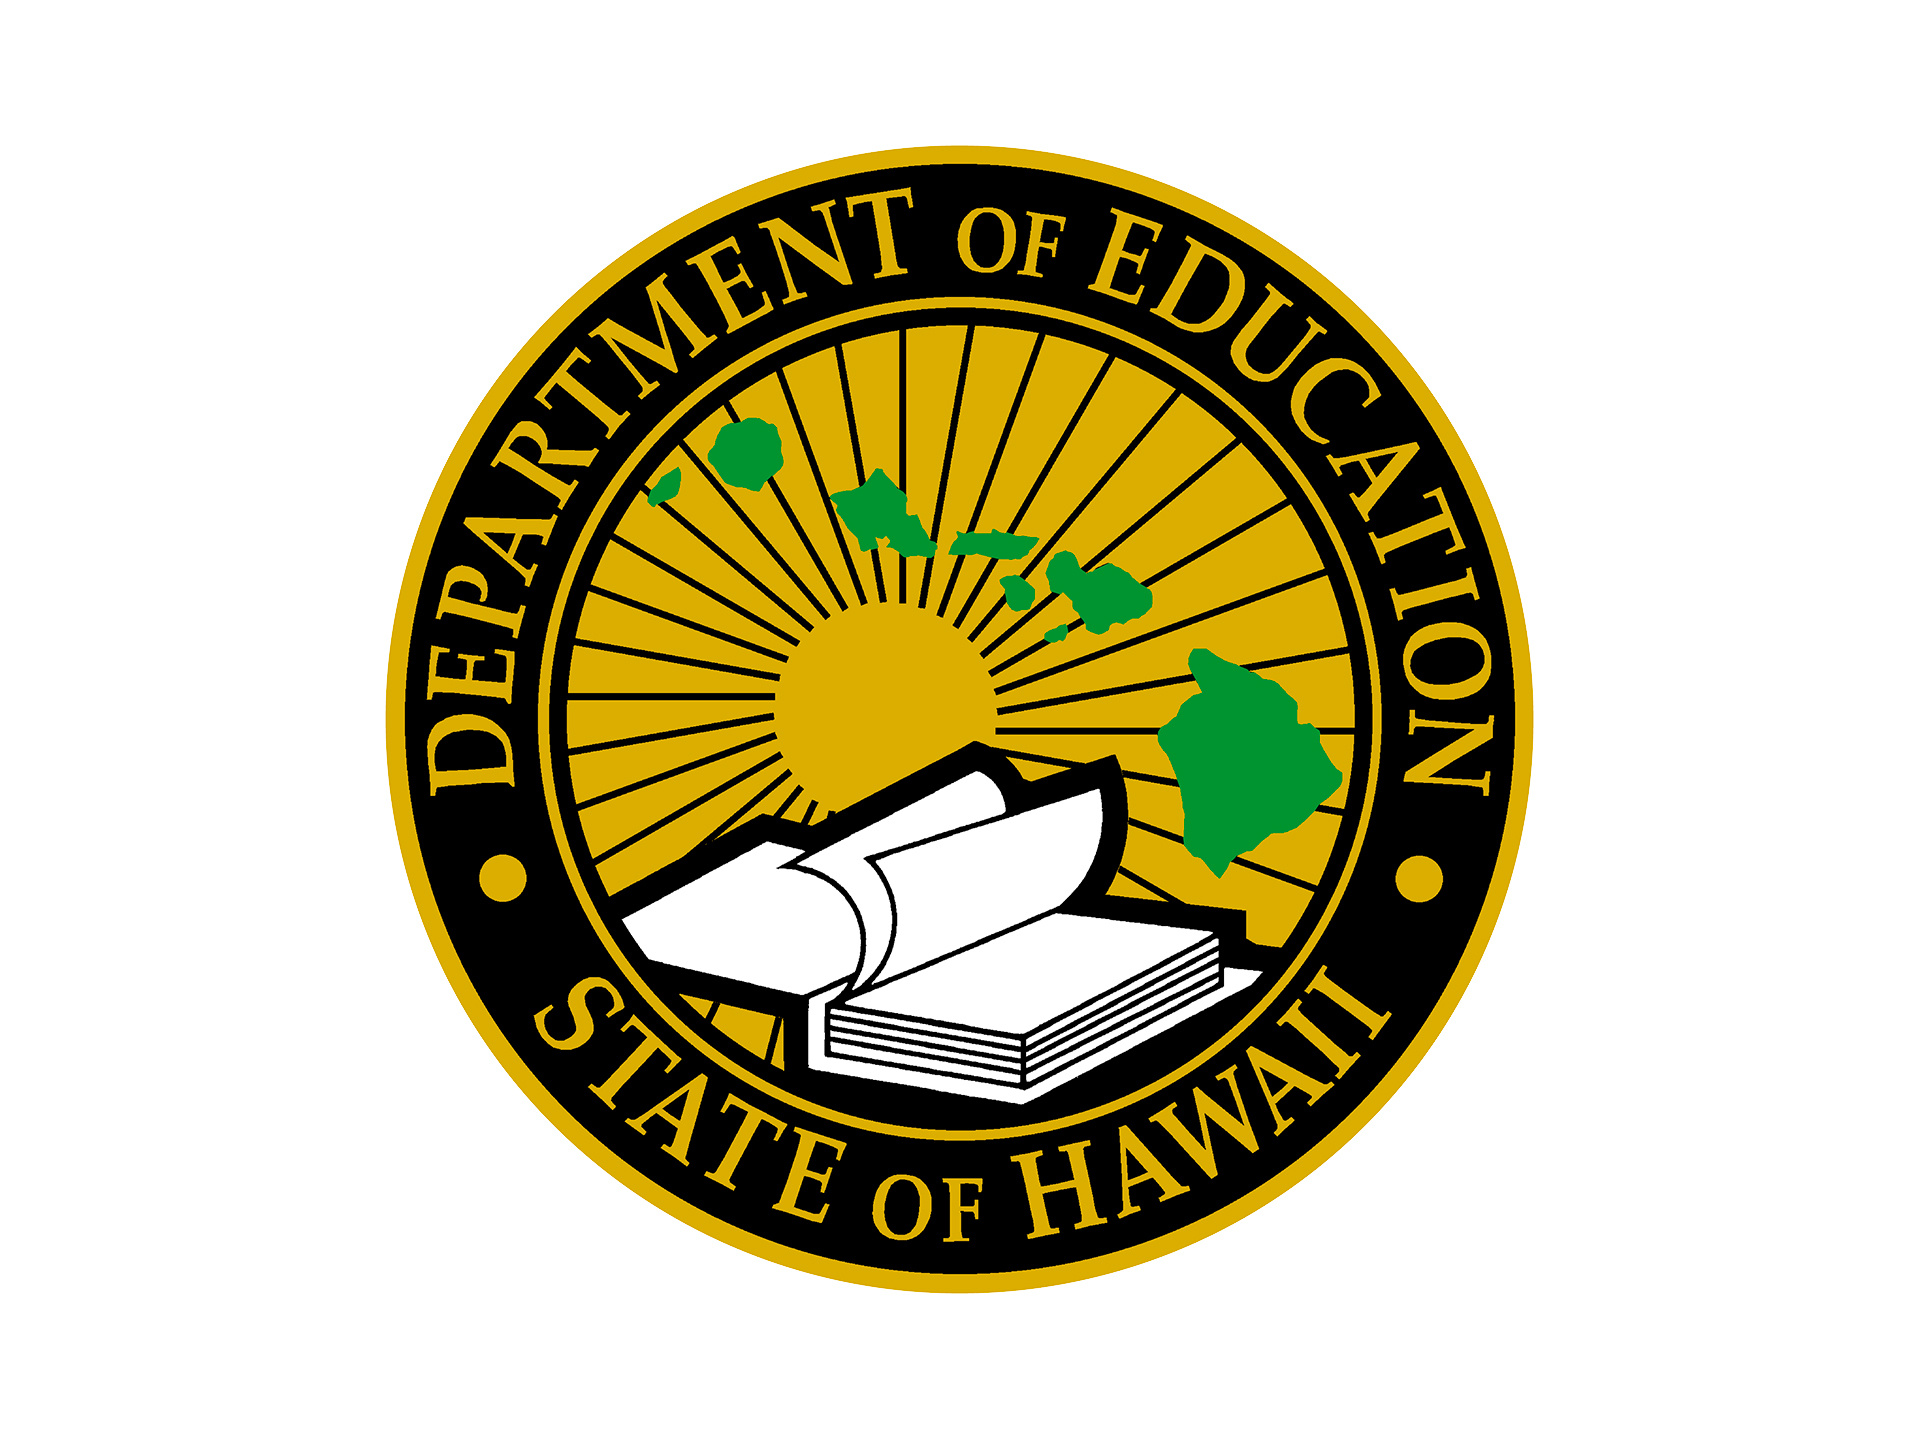 State of Hawaii Department of Education logo